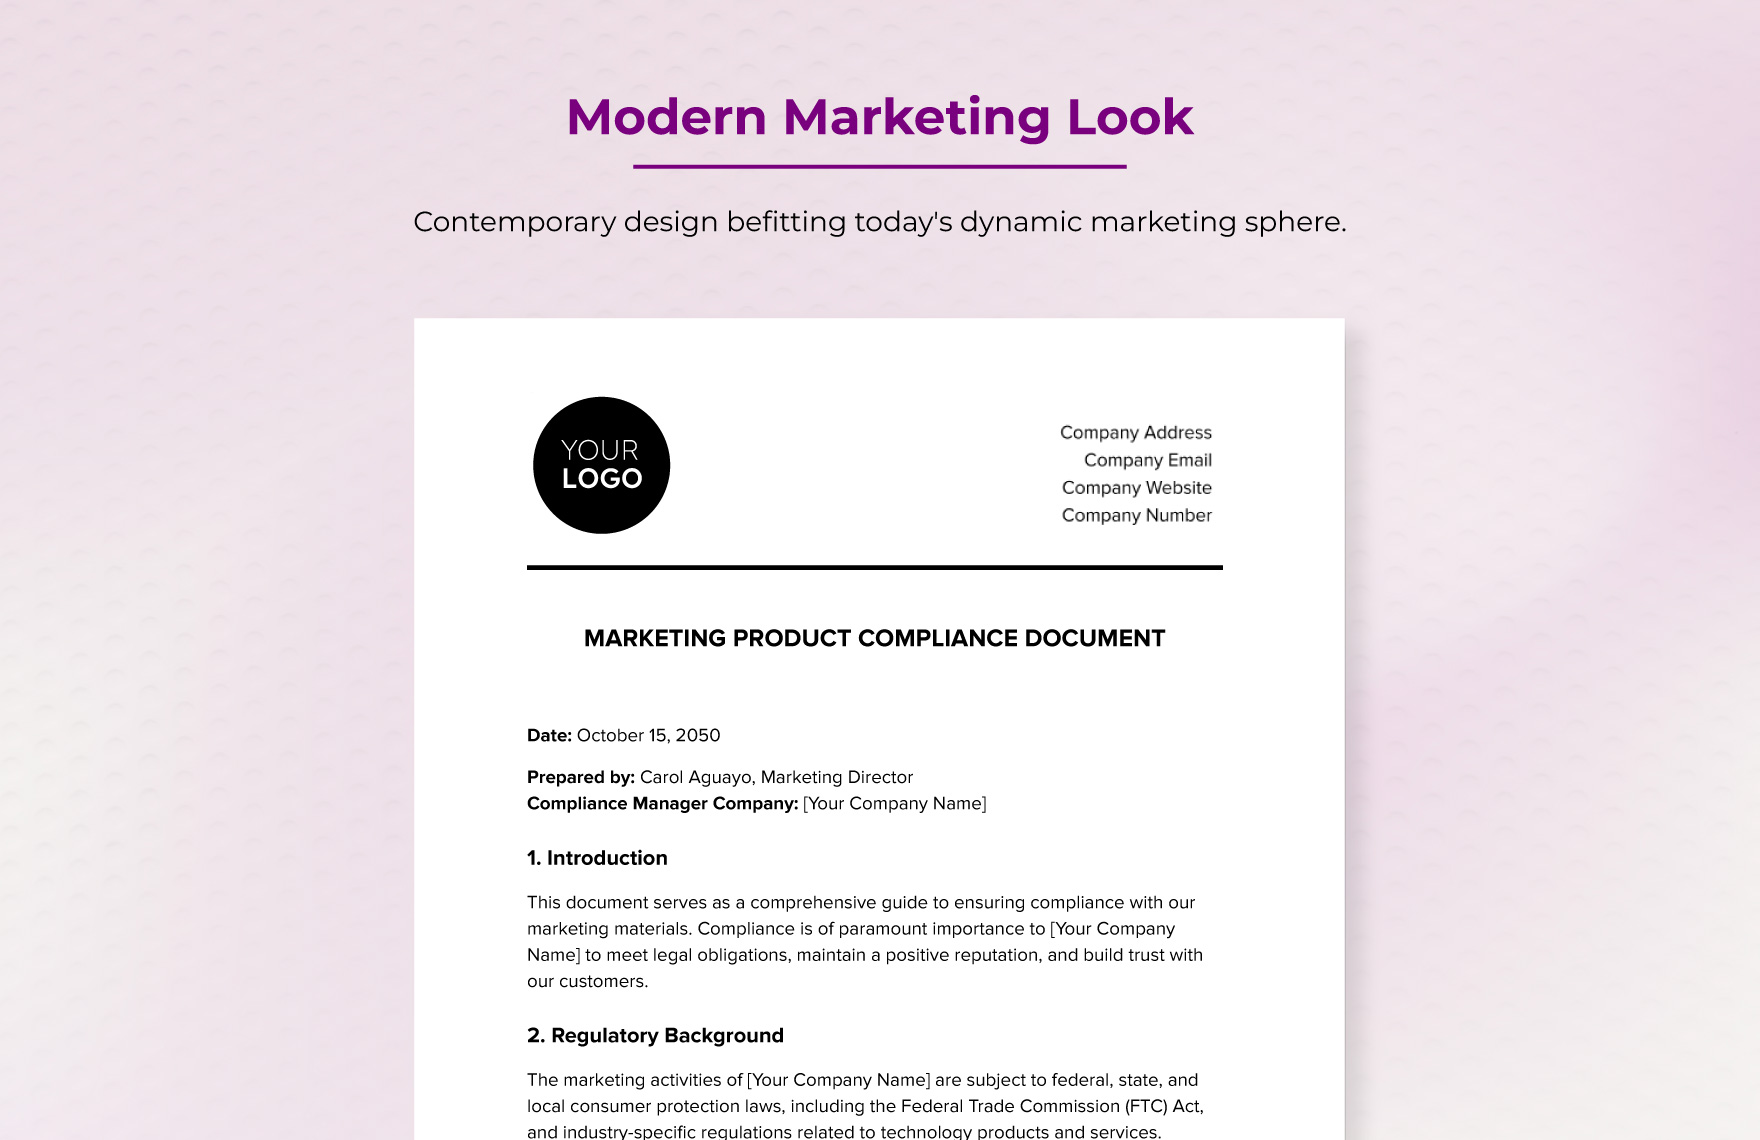 Marketing Product Compliance Document Template